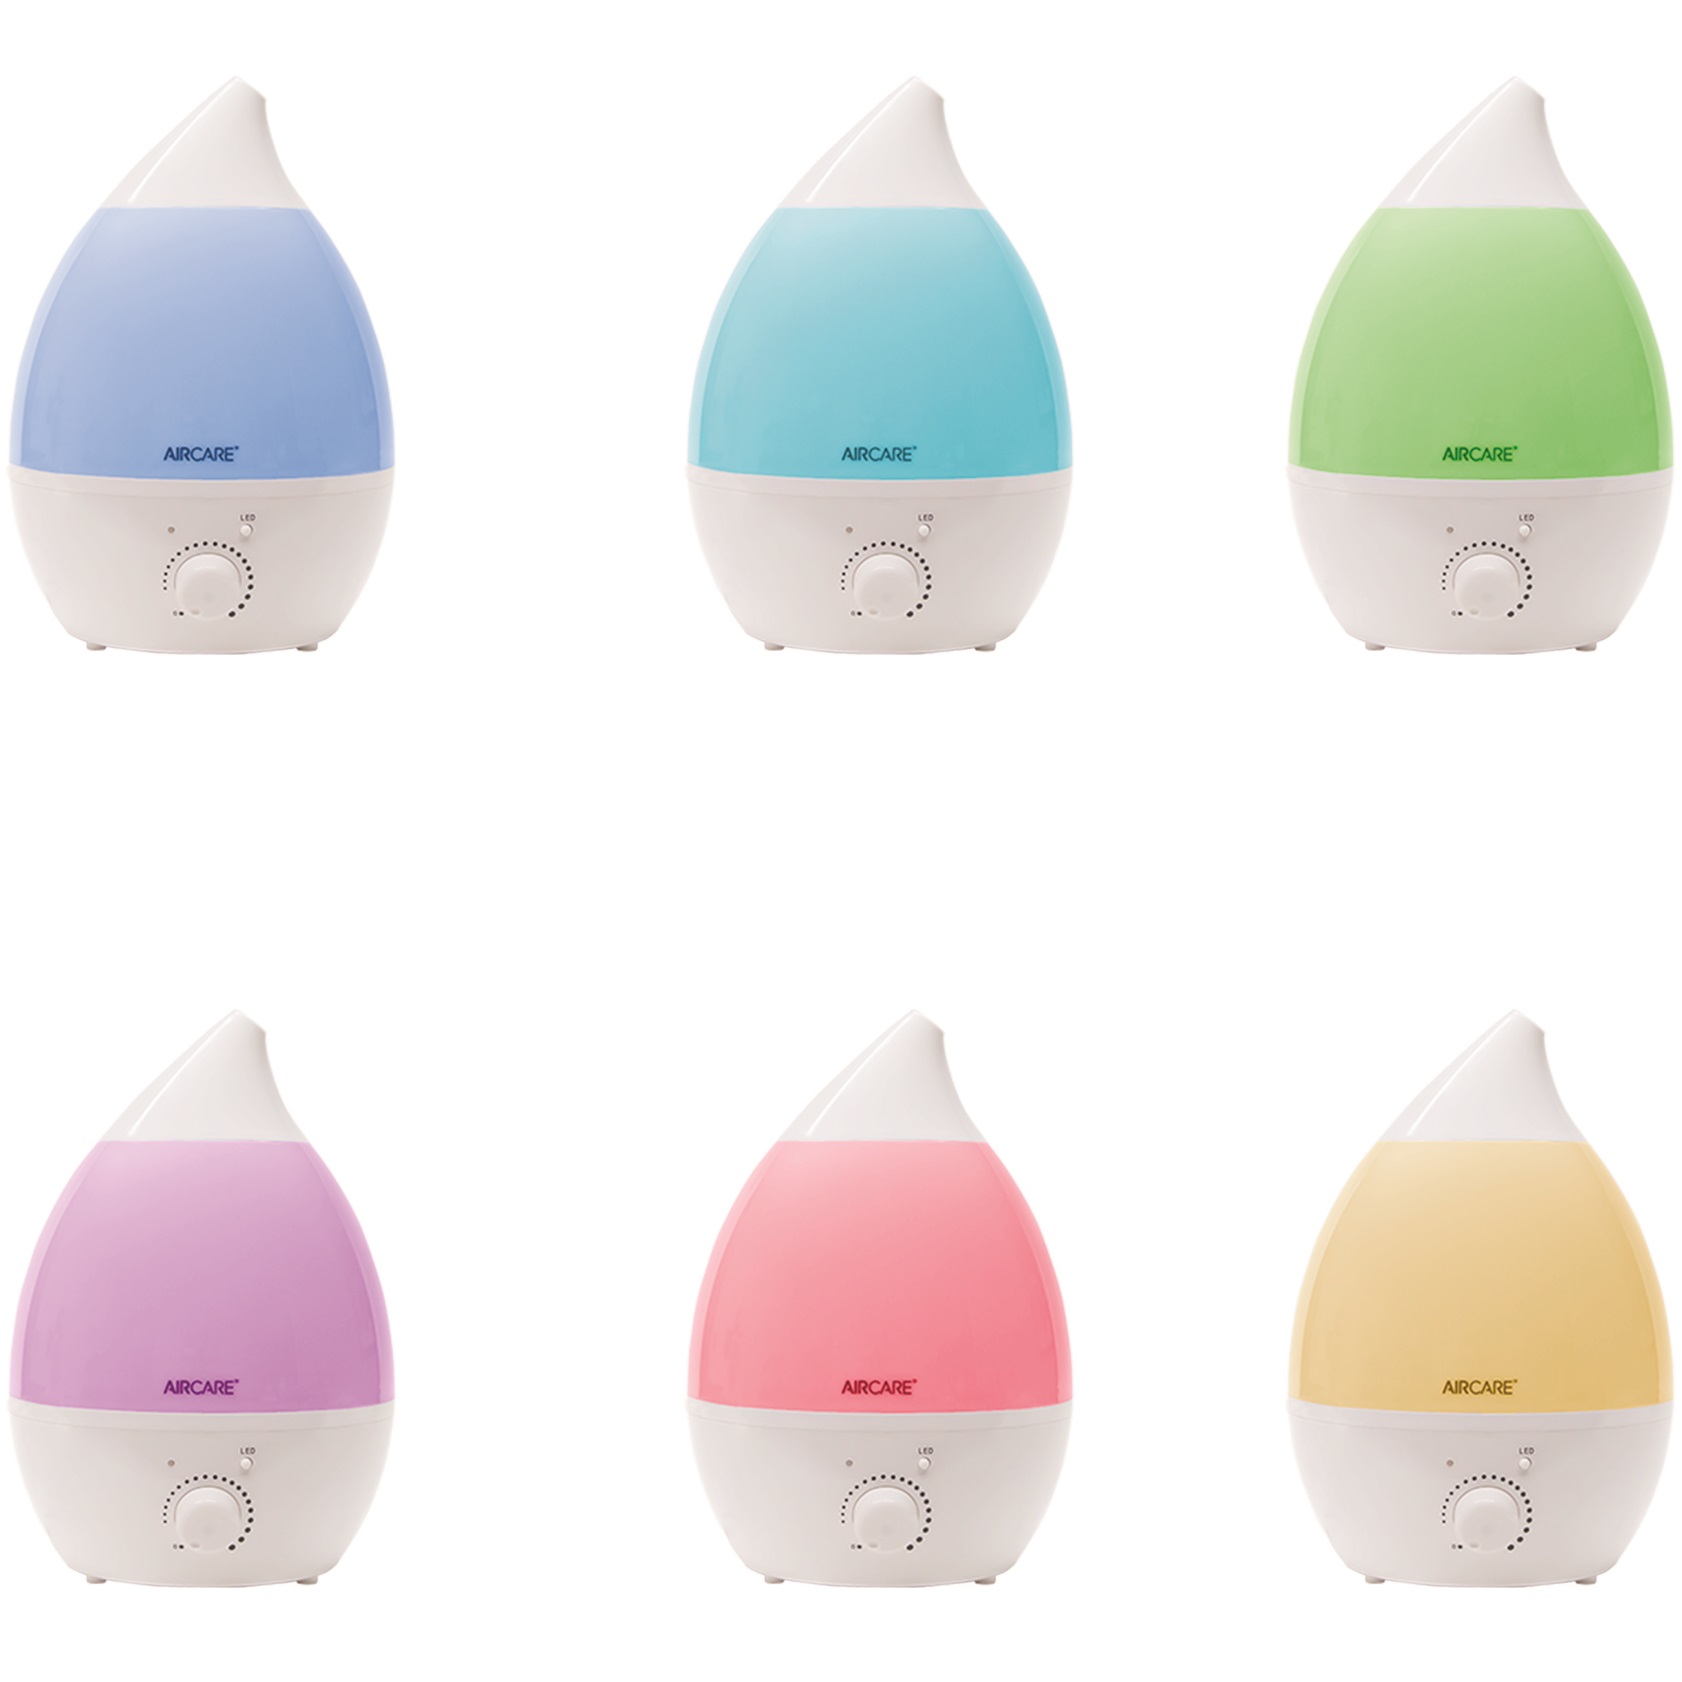 AIRCARE AUV10AWHT Aurora Mini Ultrasonic Humidifier with Aroma Diffuser and Multicolor LED Night Light, White - image 4 of 9